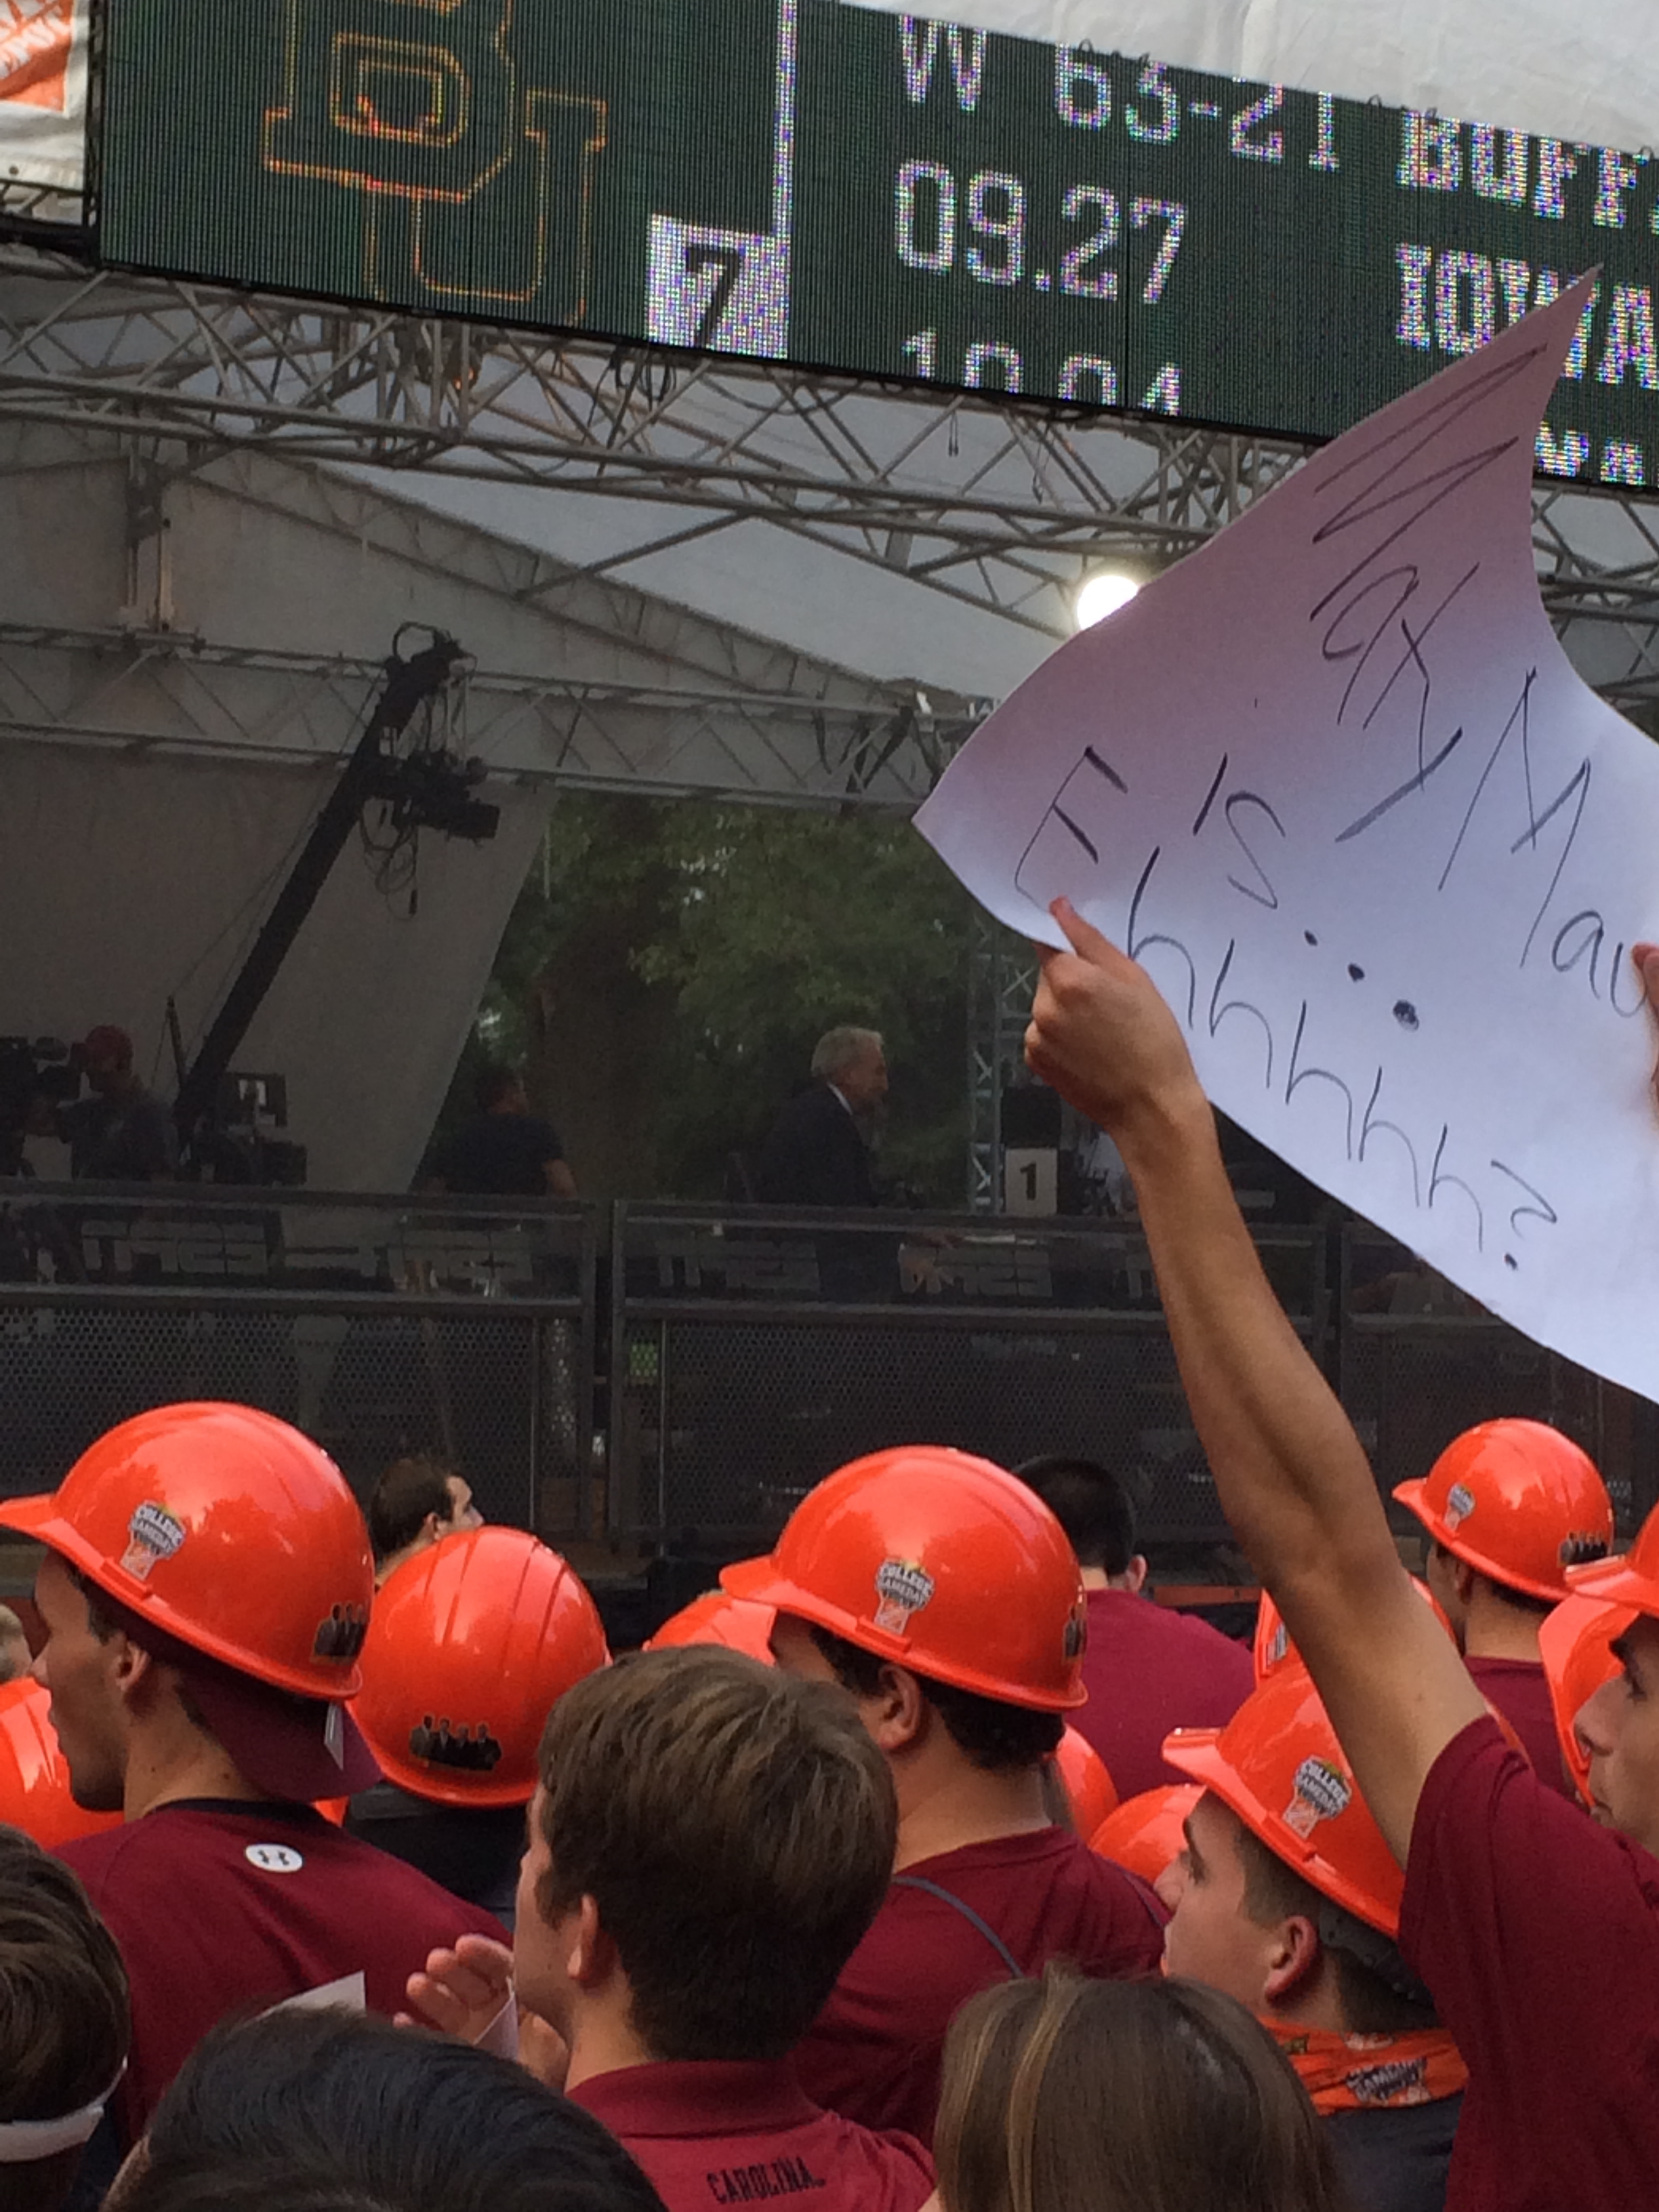 Lee Corso getting ready for the show to start.